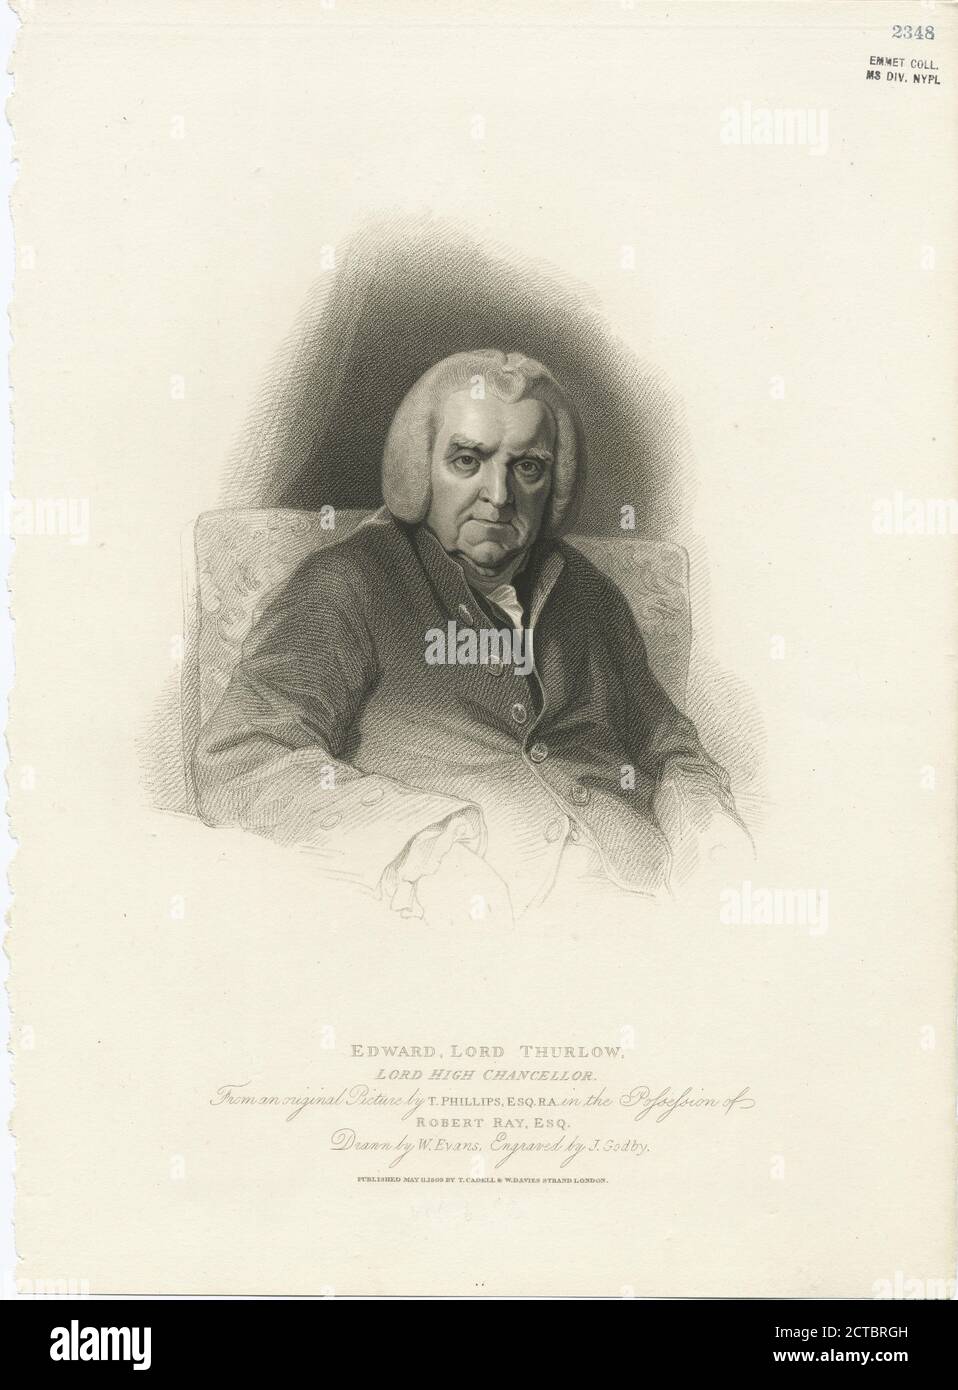 Edward, Lord Thurlow, Lord High Chancellor., STILL image, Prints, 1809, Godby, James Banque D'Images